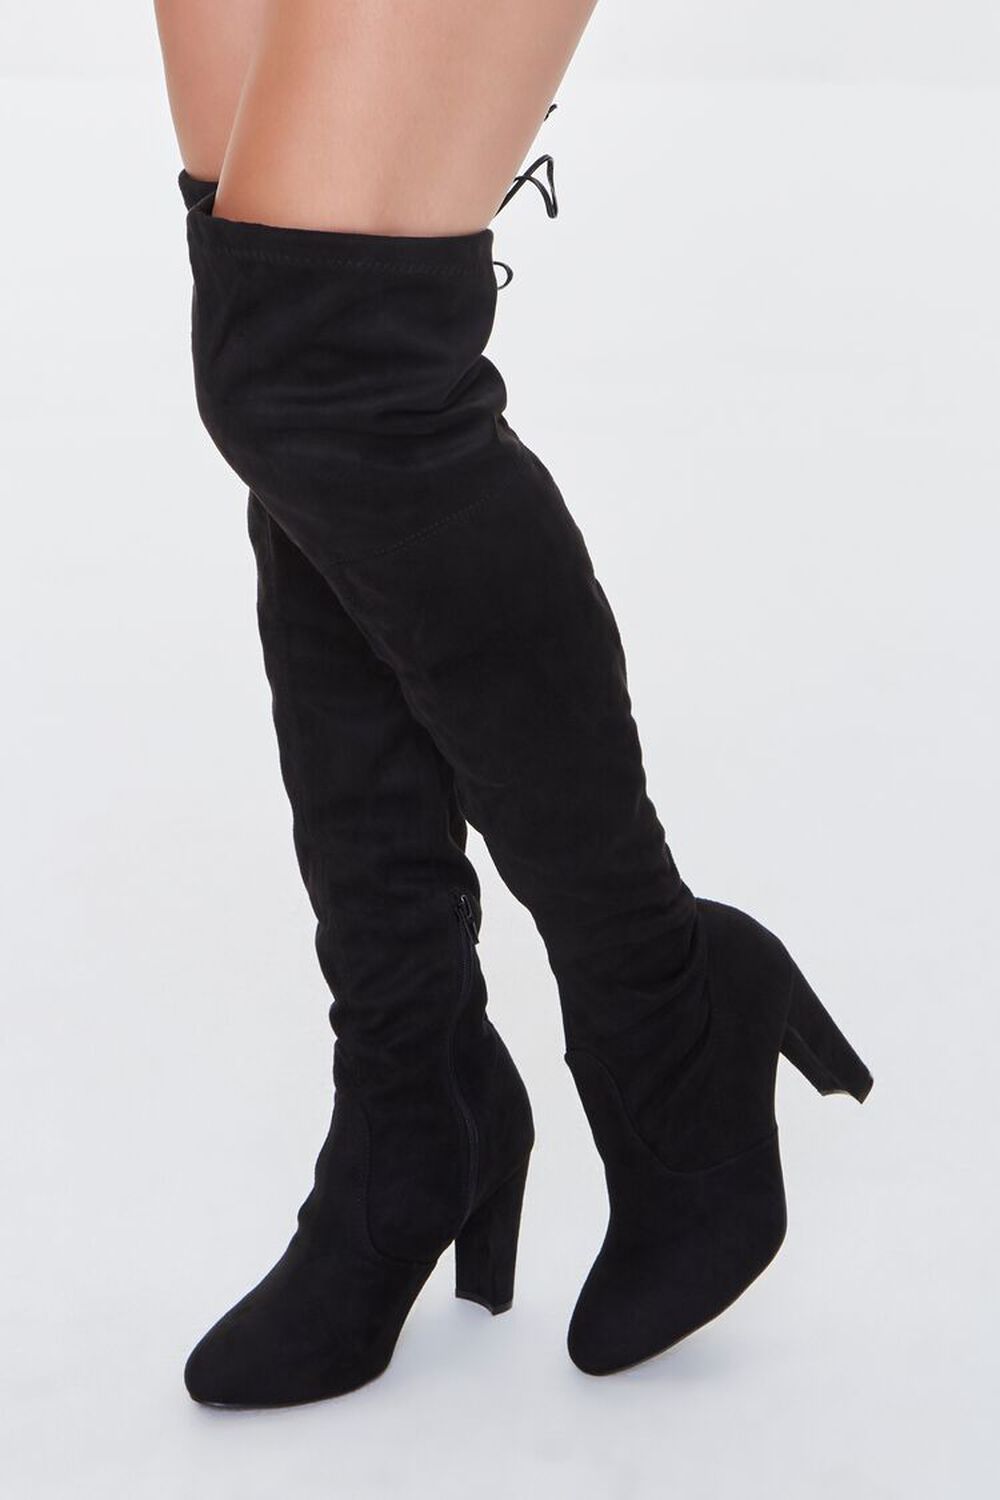 BLACK Faux Suede Thigh-High Boots, image 1